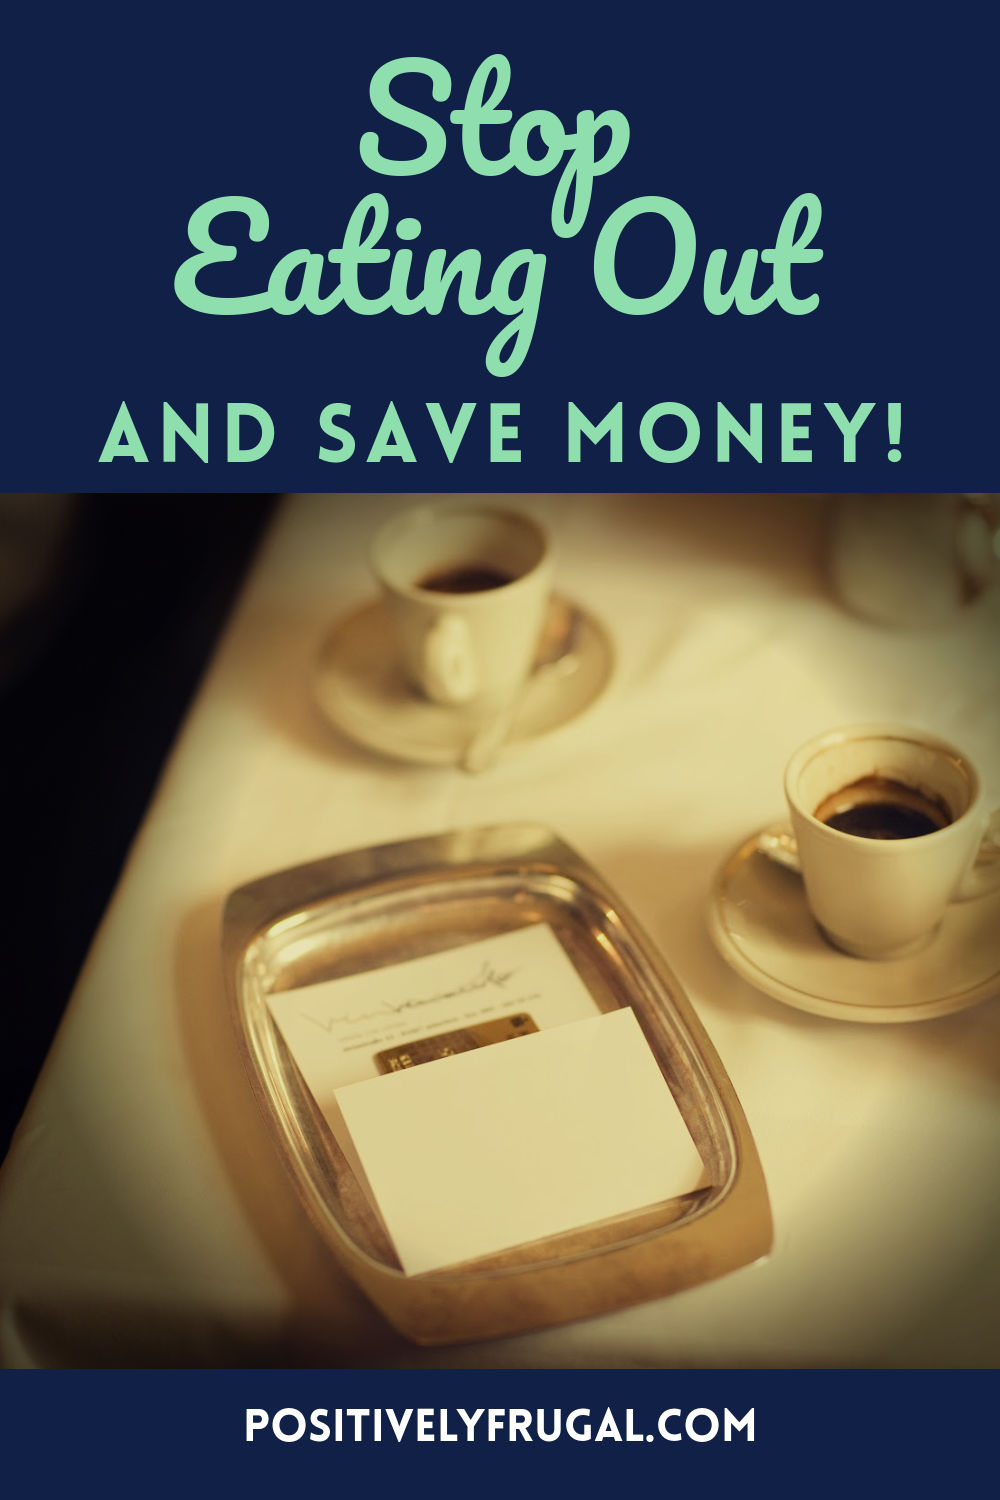 Stop Eating Out and Save Money by PositivelyFrugal.com